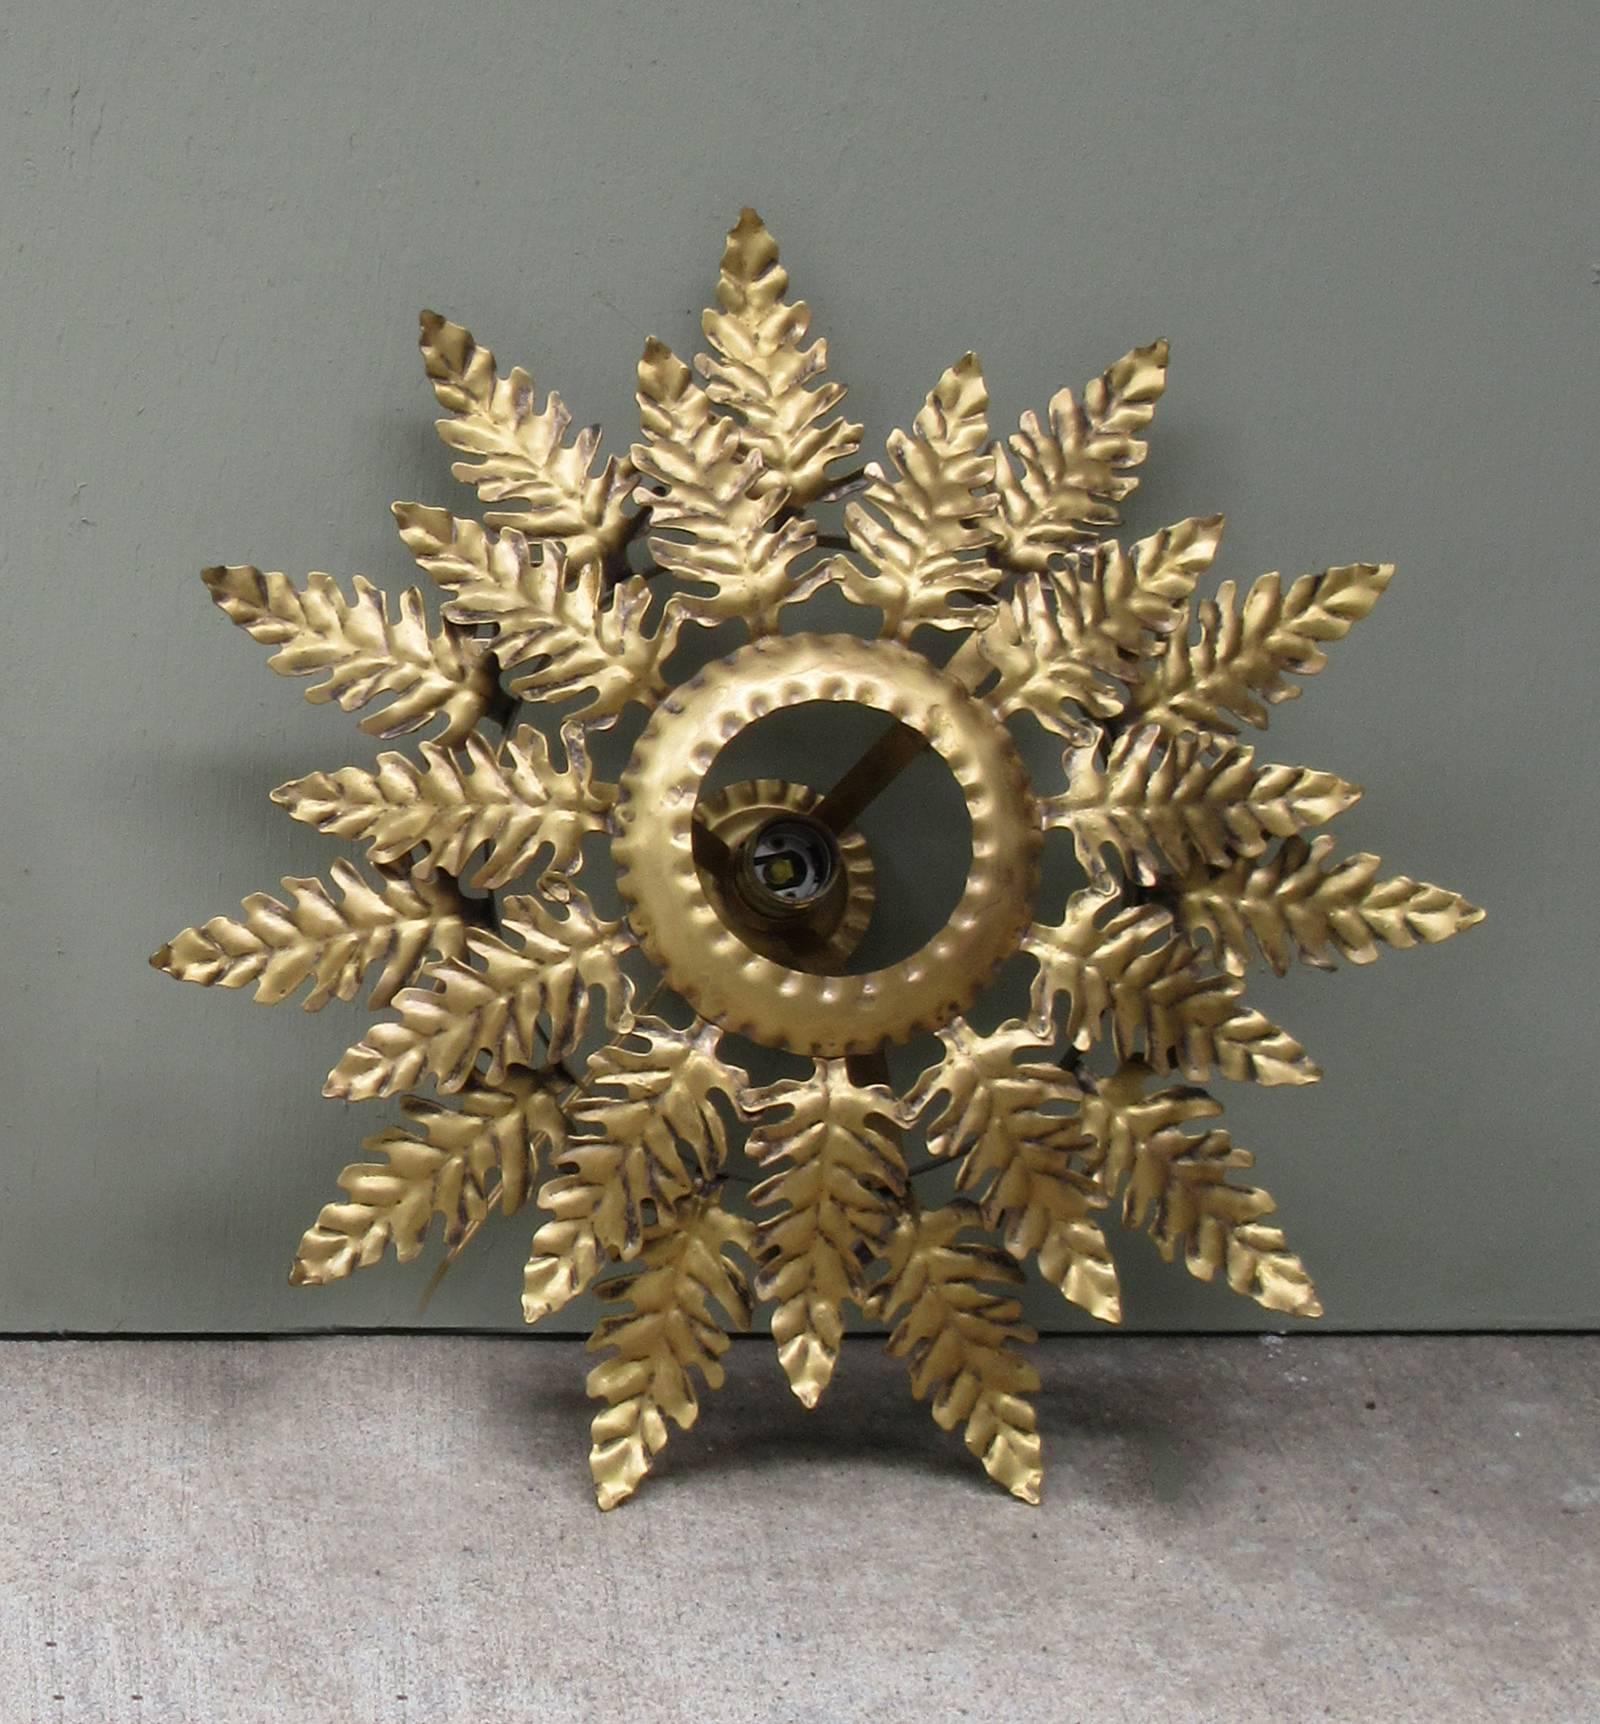 A 20th century Spanish Barcelona gilt tole flush mount light fixture, circa 1930, featuring palm fronds arranged in a starburst pattern. The fixture has been rewired and has a new porcelain socket.